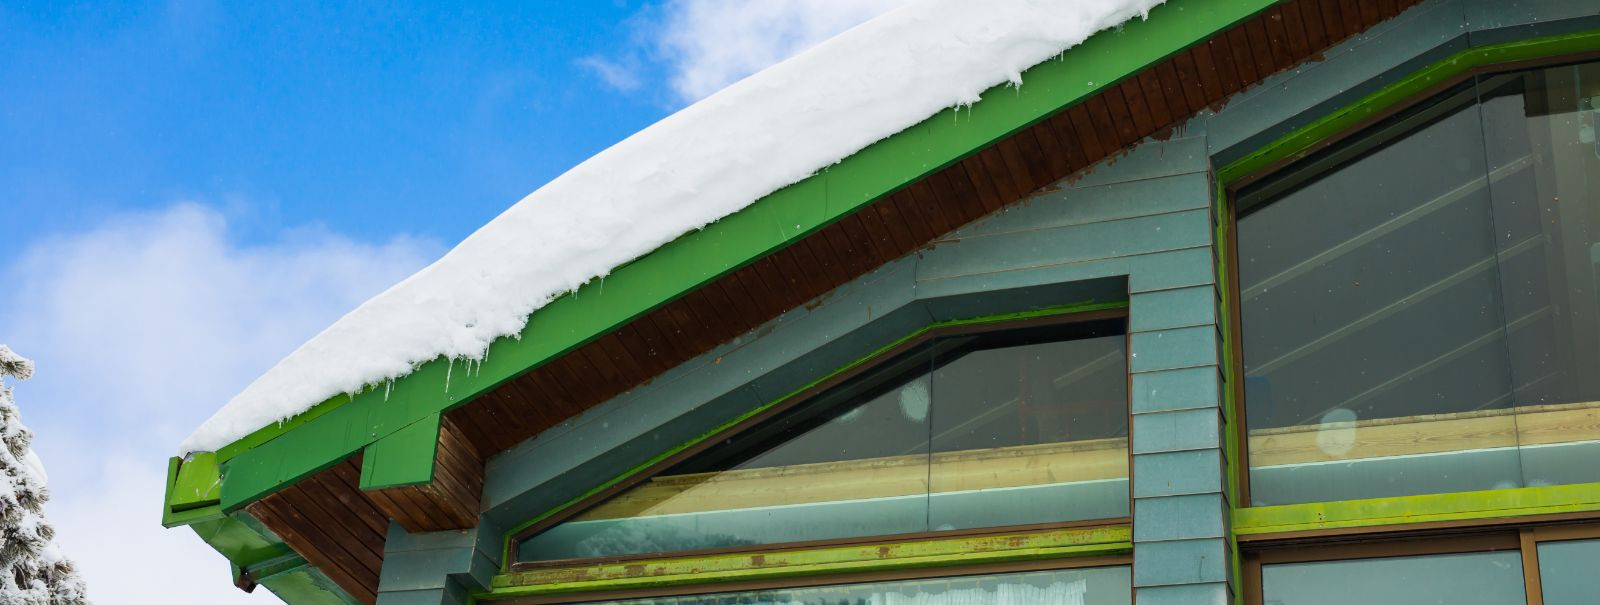 As the winter season approaches, homeowners must turn their attention to the challenges posed by snow and ice. Effective snow cleaning is not just about conveni